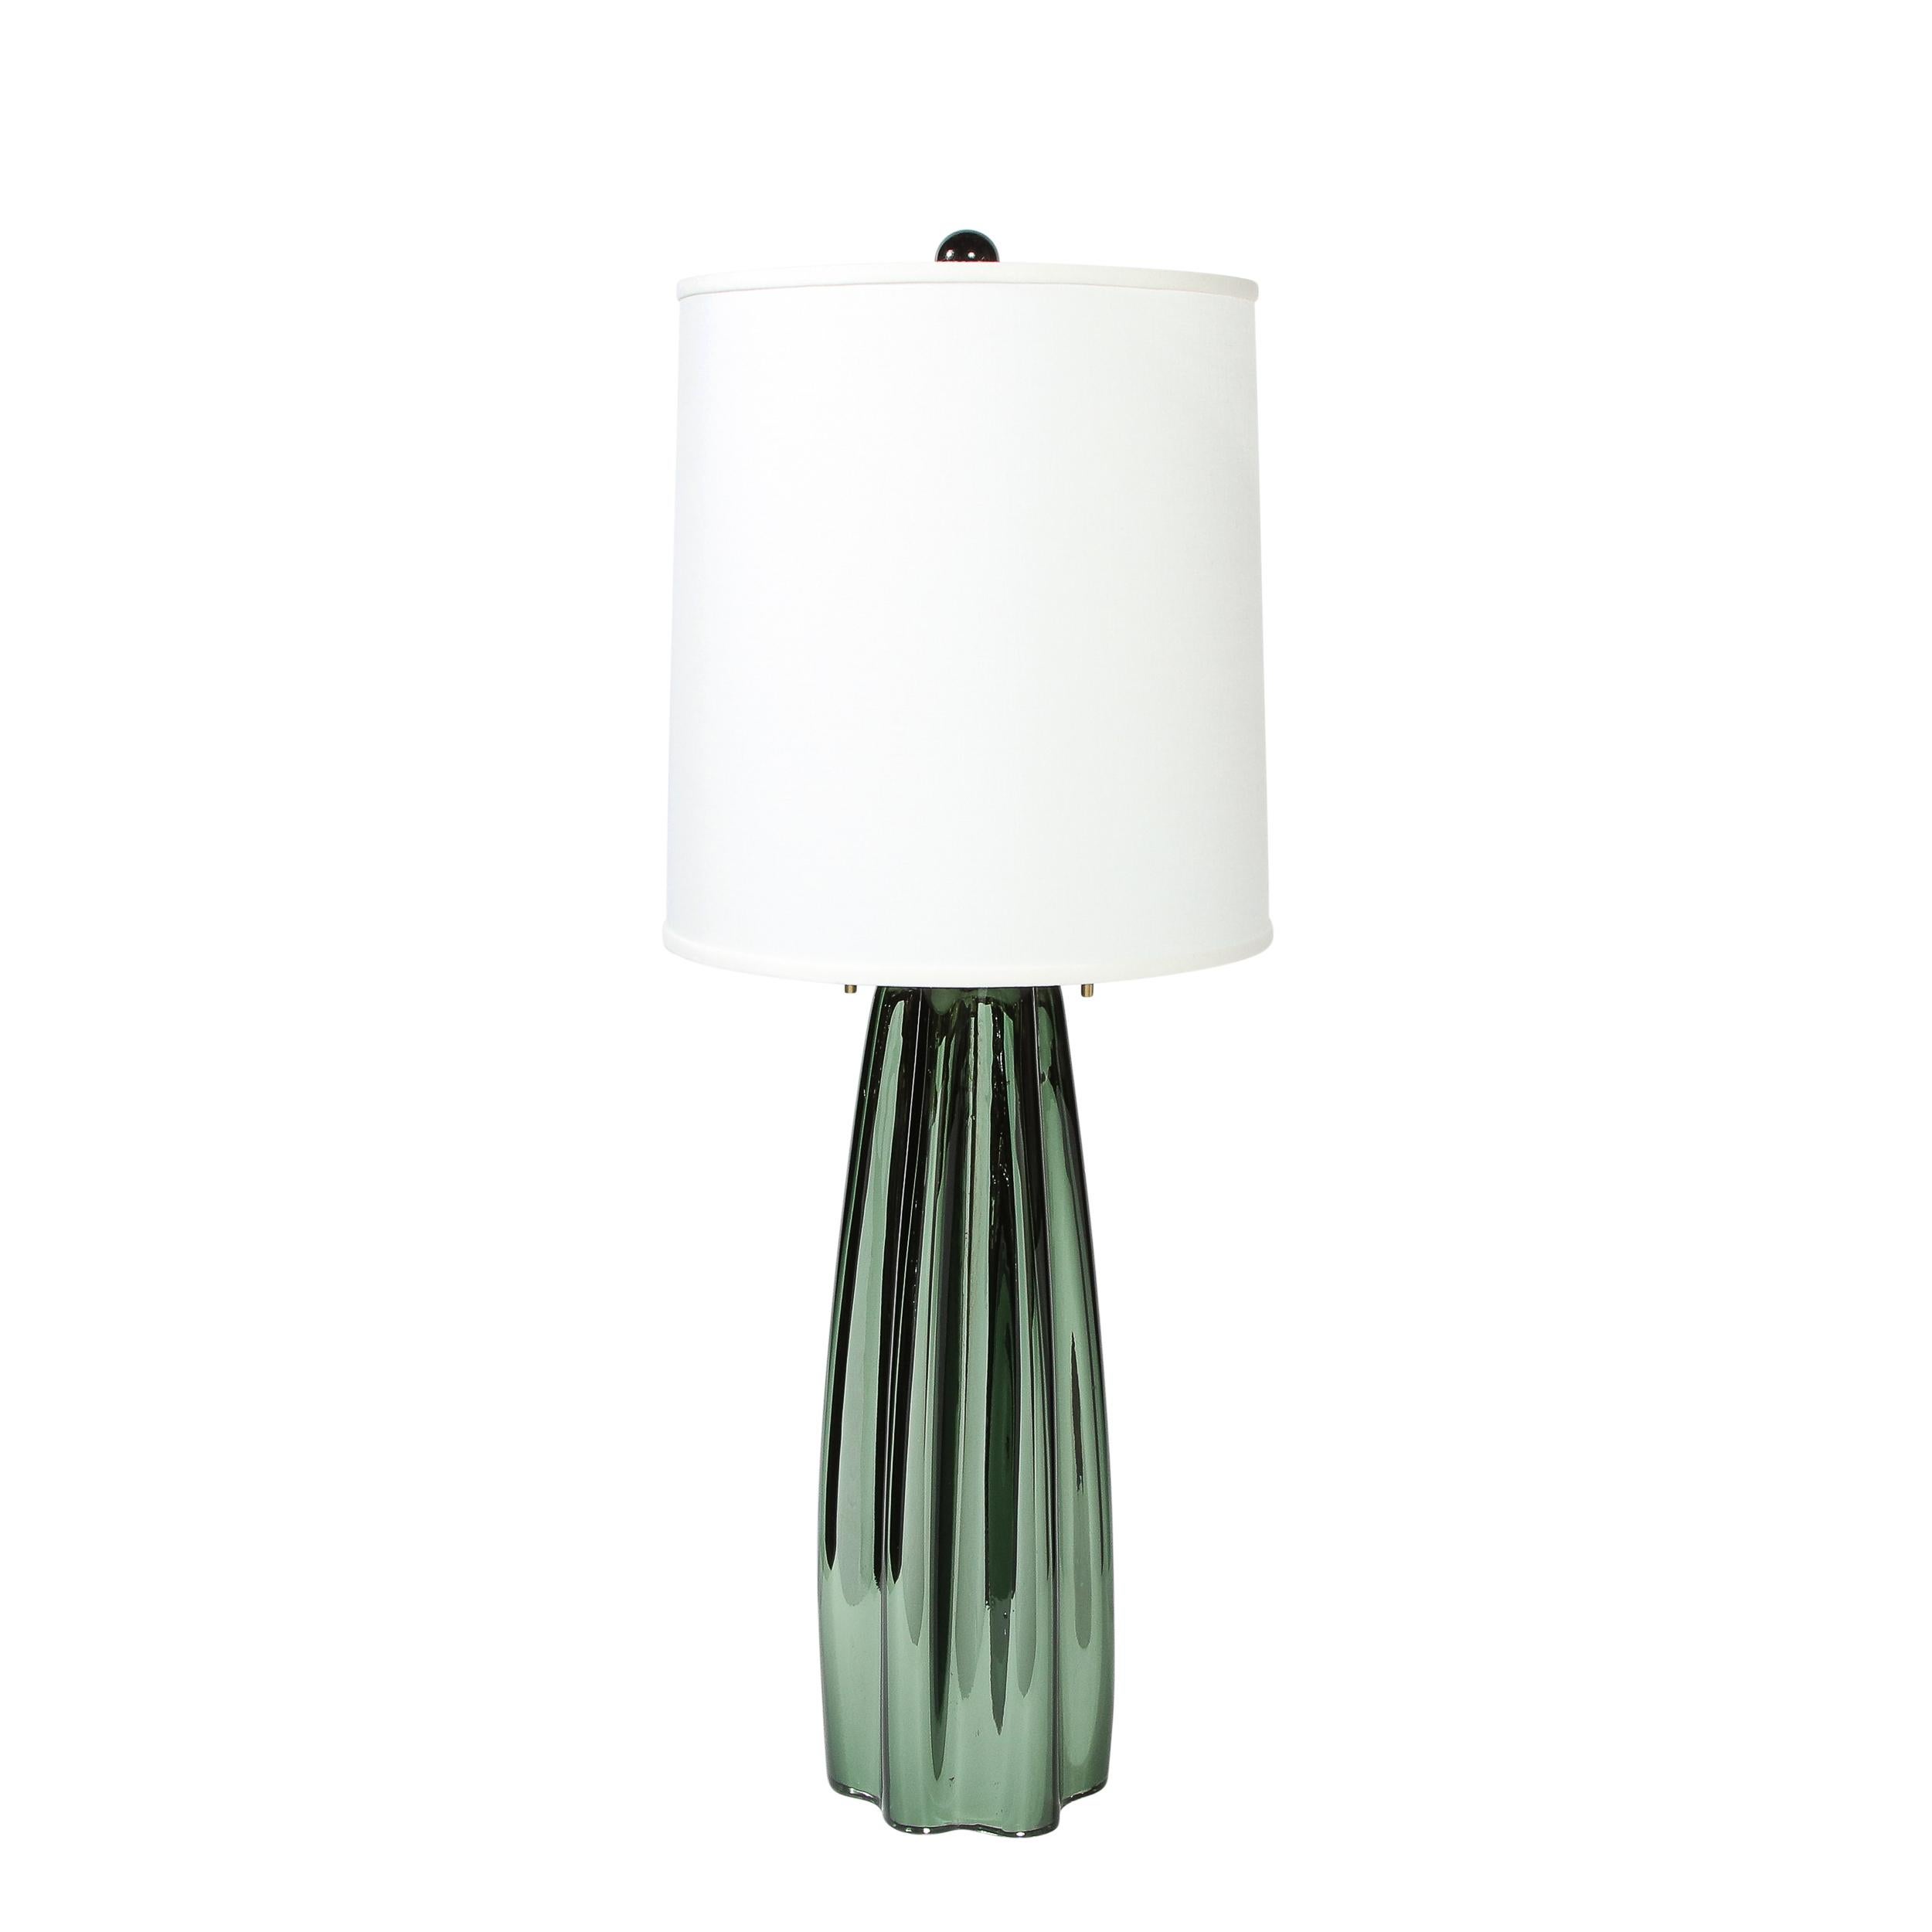 This stunning pair of modernist table lamps were realized in Murano, Italy- the island off the coast of Venice renowned for centuries for its superlative glass production. They feature channel form bodies with scalloped bodies in iridescent viridian